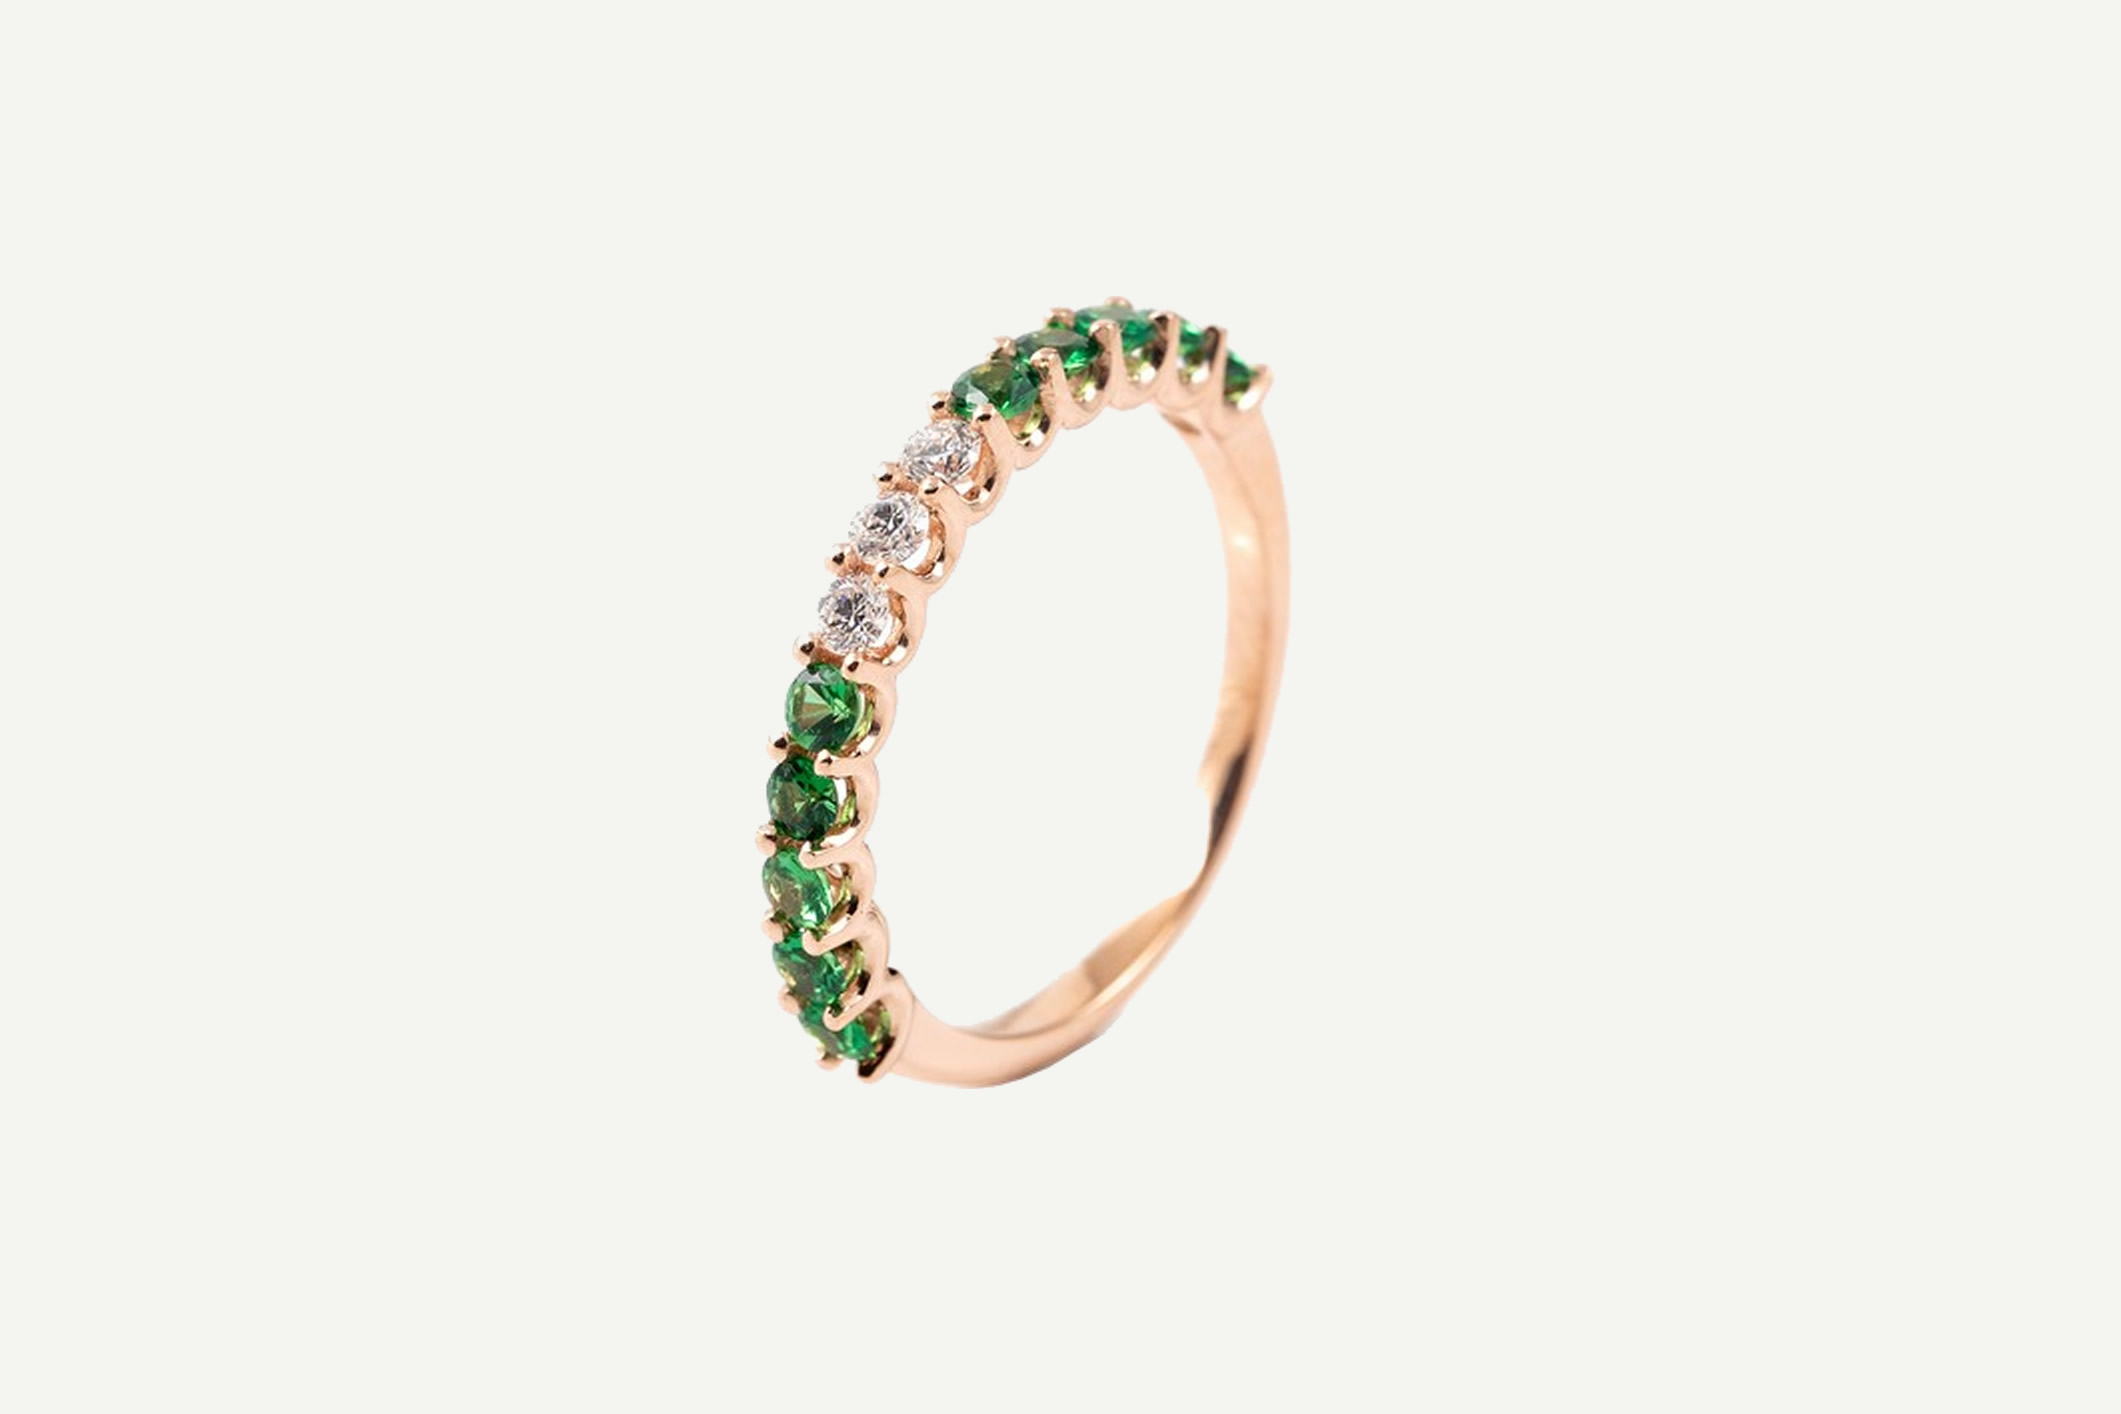 Setenta y Nueve ring in rose gold with green tsavorites and diamonds